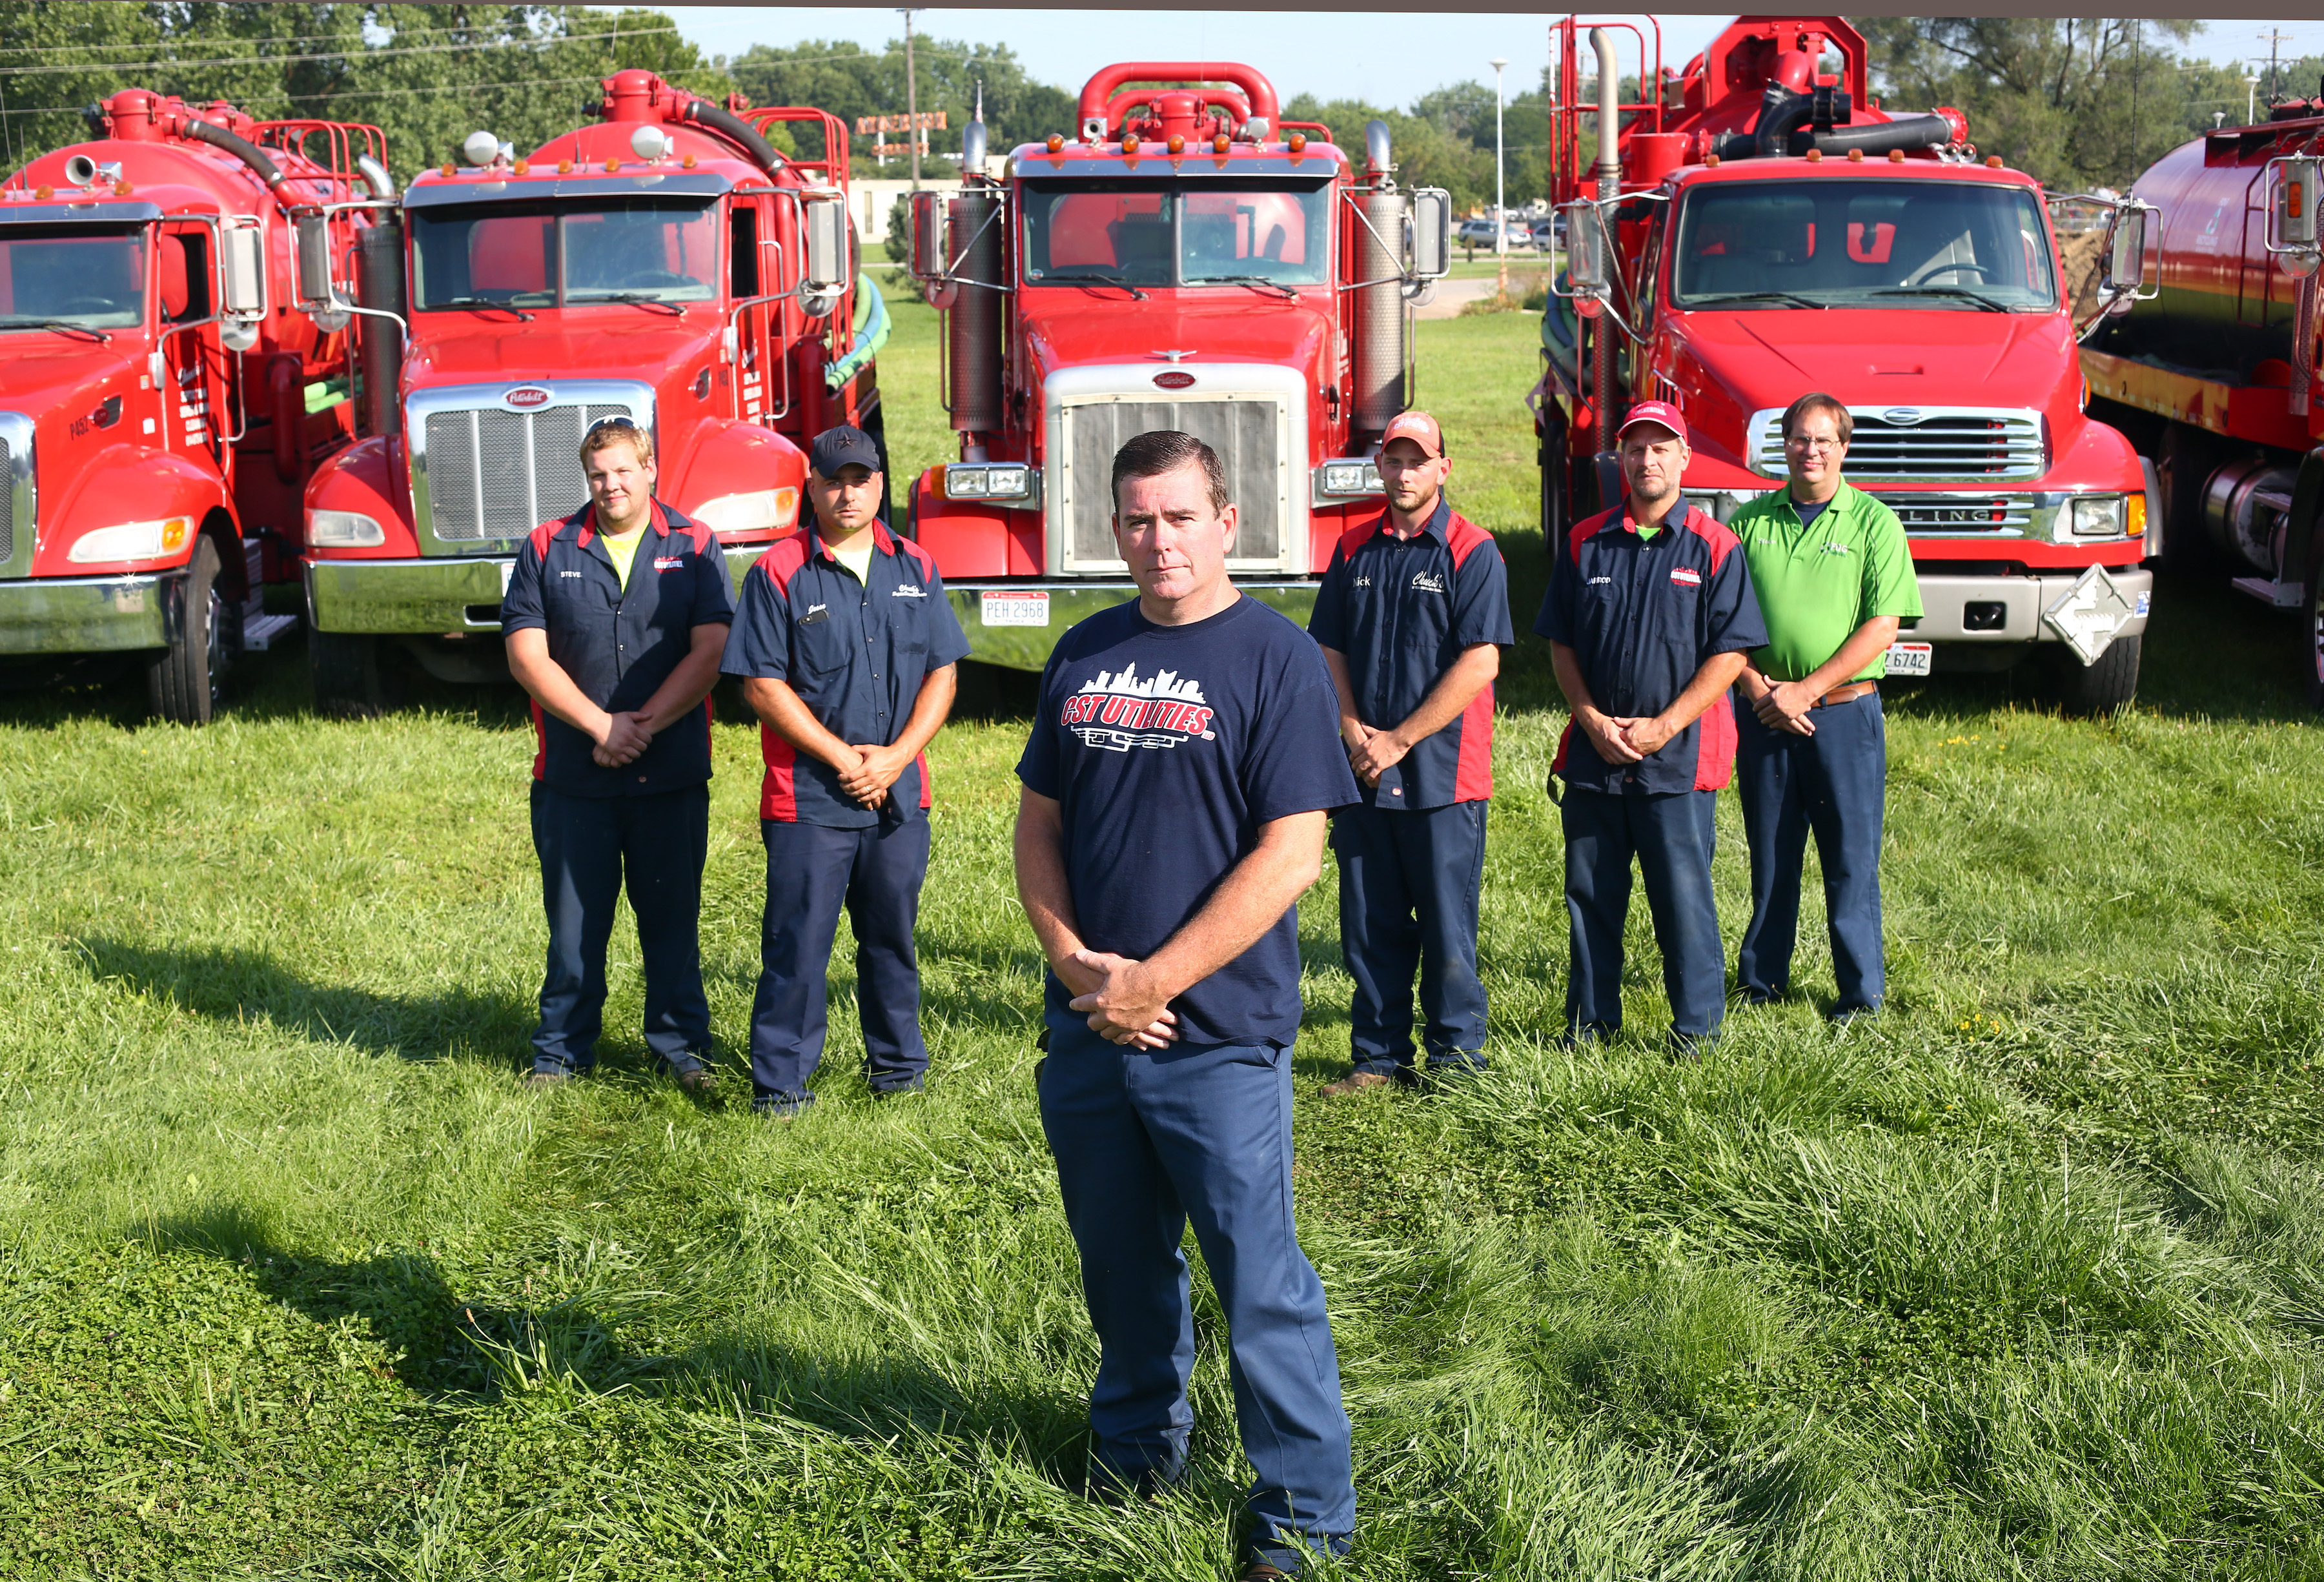 Chuck Lang, owner of Chuck's Septic Tank, Sewer & Drain Cleaning in Grove City, Ohio, front, stands with his septic tank service employees. (Photo by Amy Voigt)